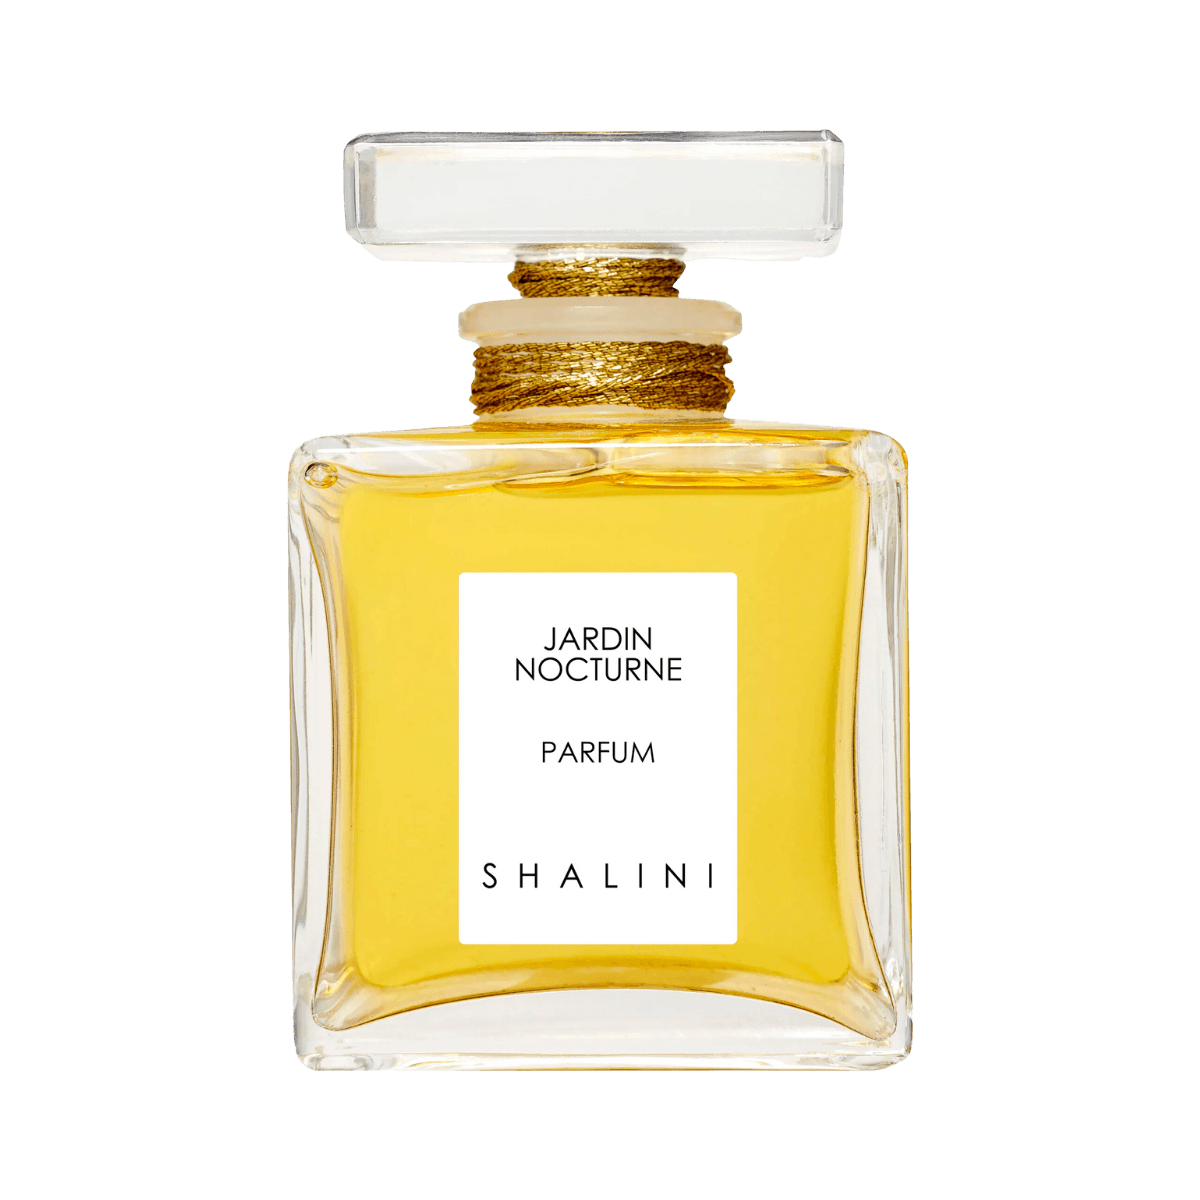 Image of Jardin Nocturne glass stopper by the perfume brand Shalini